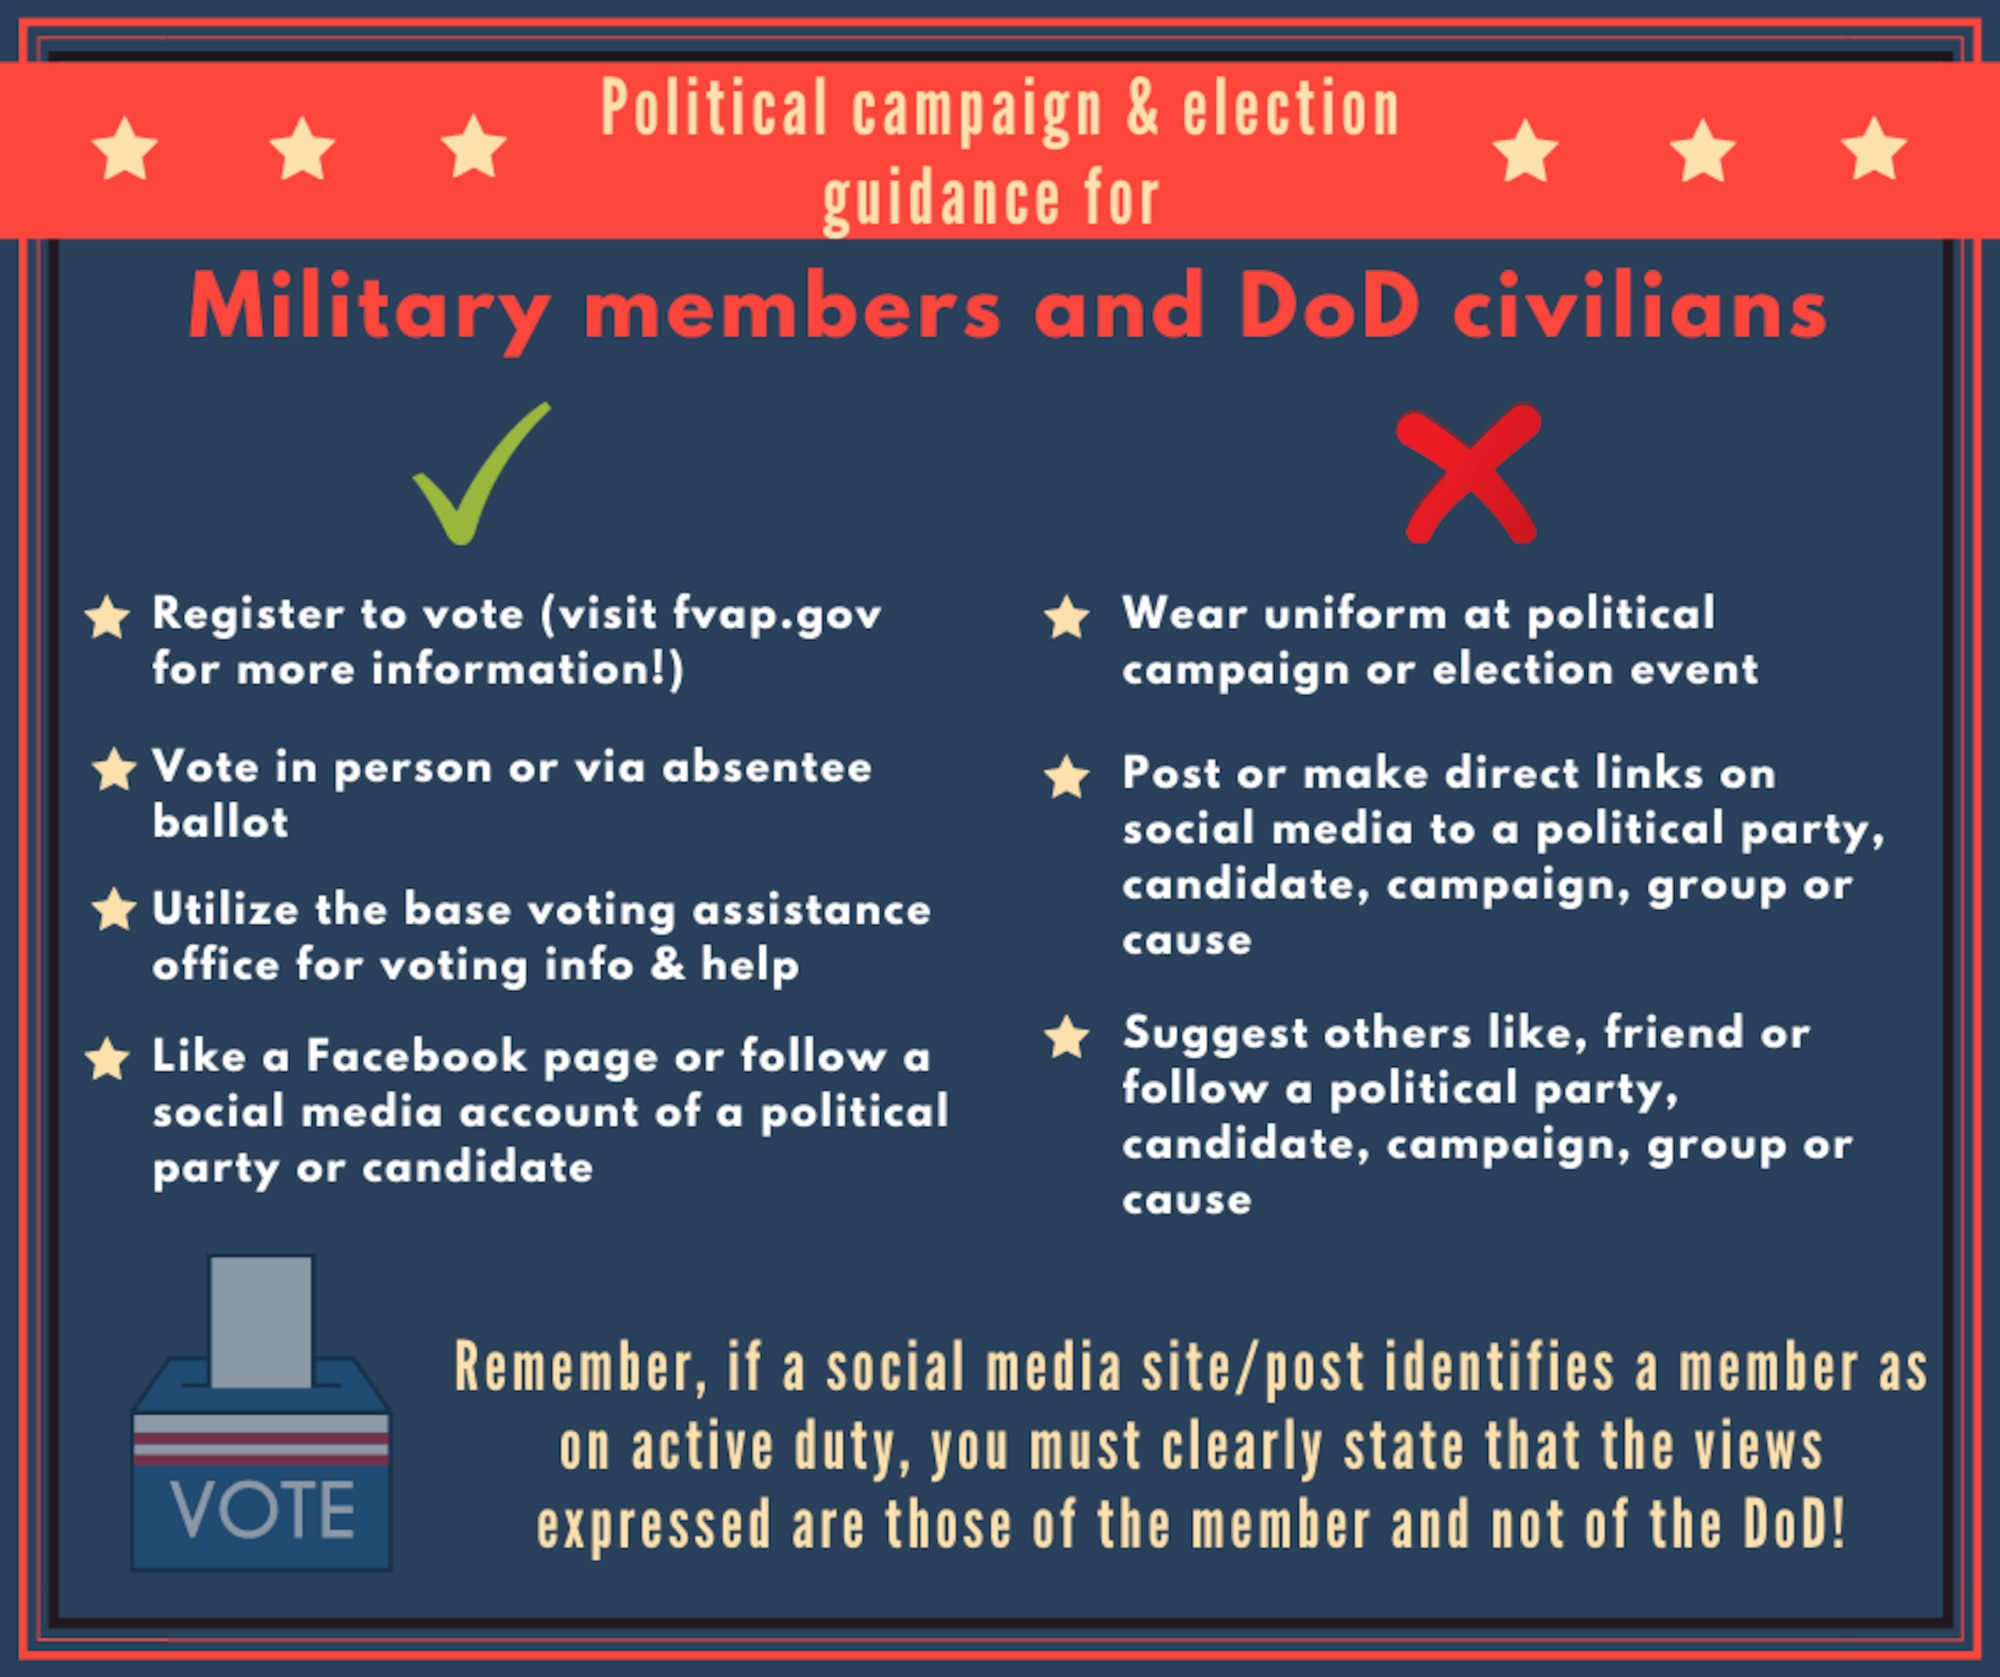 Political campaign and election guidance for military members and DoD civilians. It is okay to register to vote (members may visit fvap.gov for more information), vote in person or via absentee ballot, utilize the base voting assistance office for voting info and help and like or follow a social media account of a political party or candidate. It is not okay to wear a uniform at a political campaign or election event, post or make direct links on social media to a political party, candidate, campaign, group or cause, and it is not okay to suggest others like, friend or follow a political party, candidate, campaign, group or cause. Remember, if a social media site/post identifies a member as on active duty, you must clearly state that the views expressed are those of the member and not of the DOD!